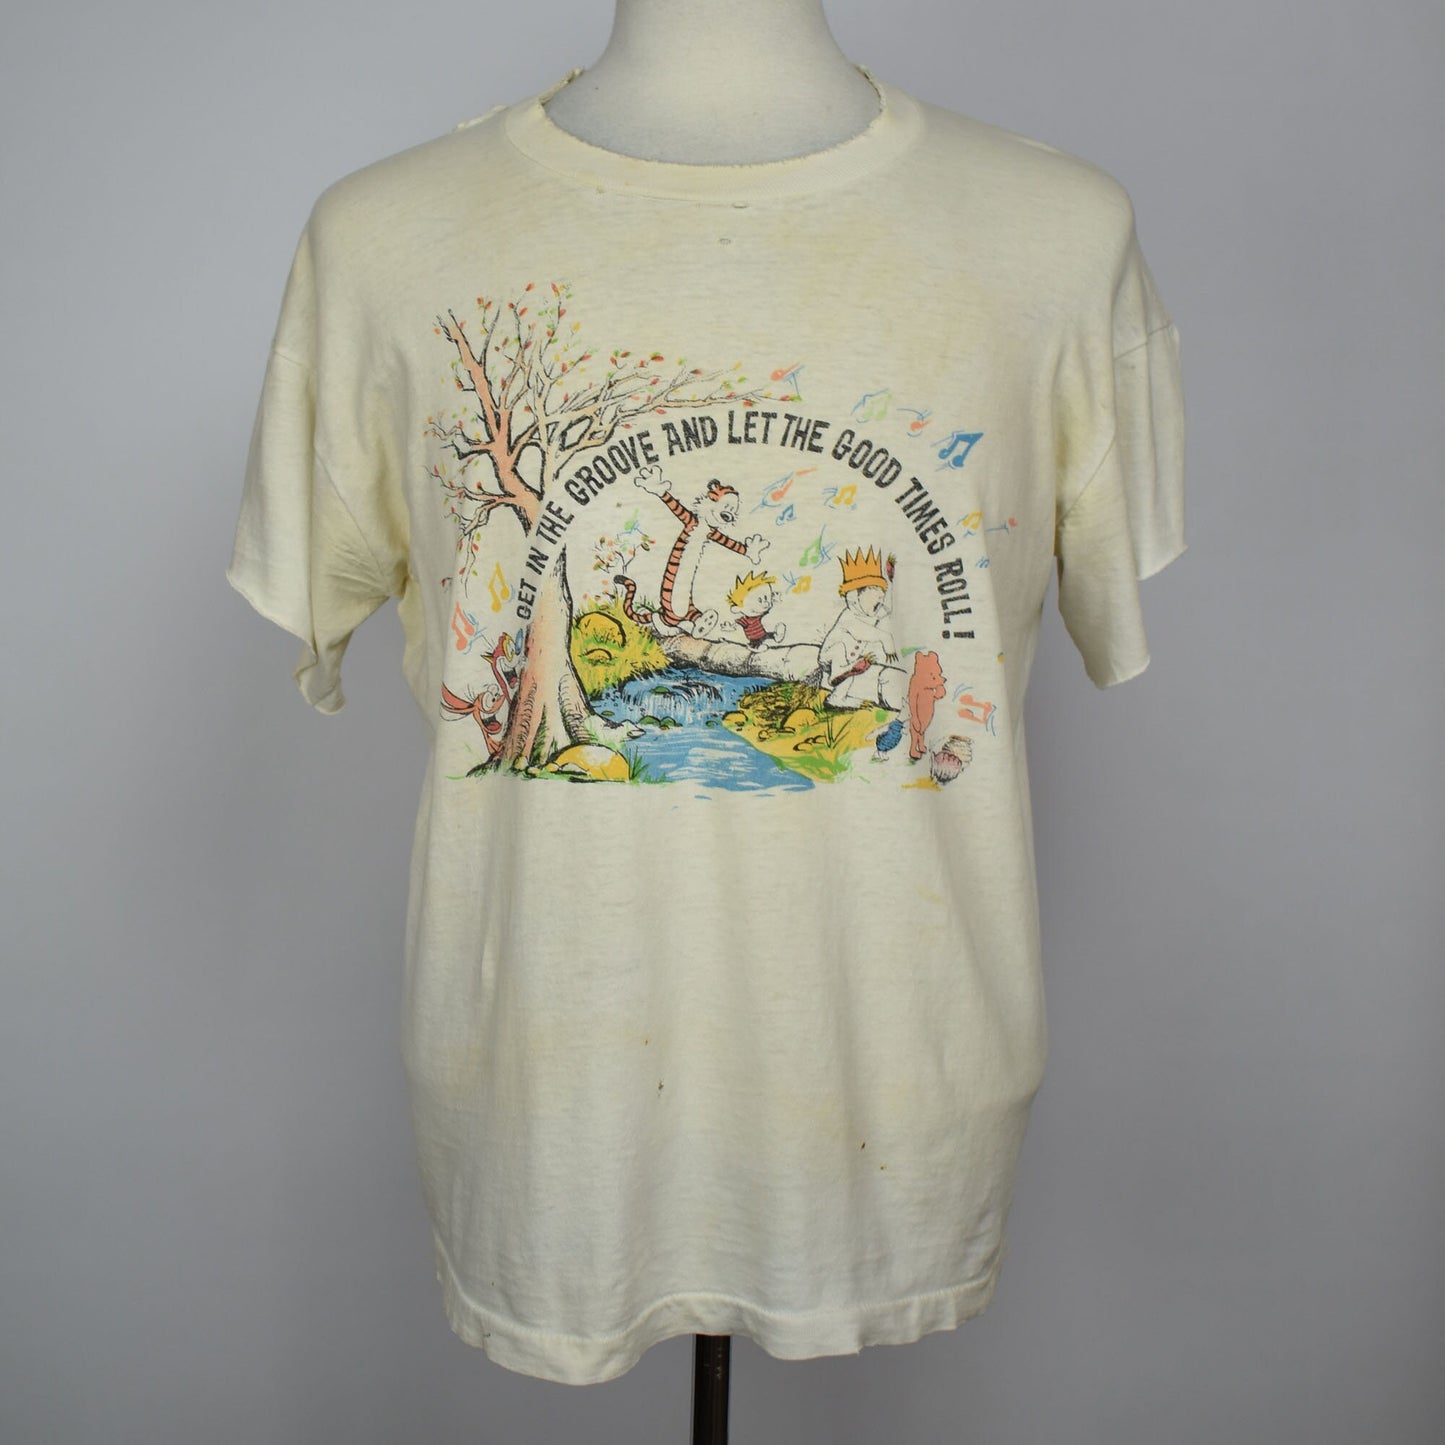 Vintage Very Rare 90s Grateful Dead Get In The Groove And Let The Good Times Roll! Where The Wild Things Are Tour T-shirt